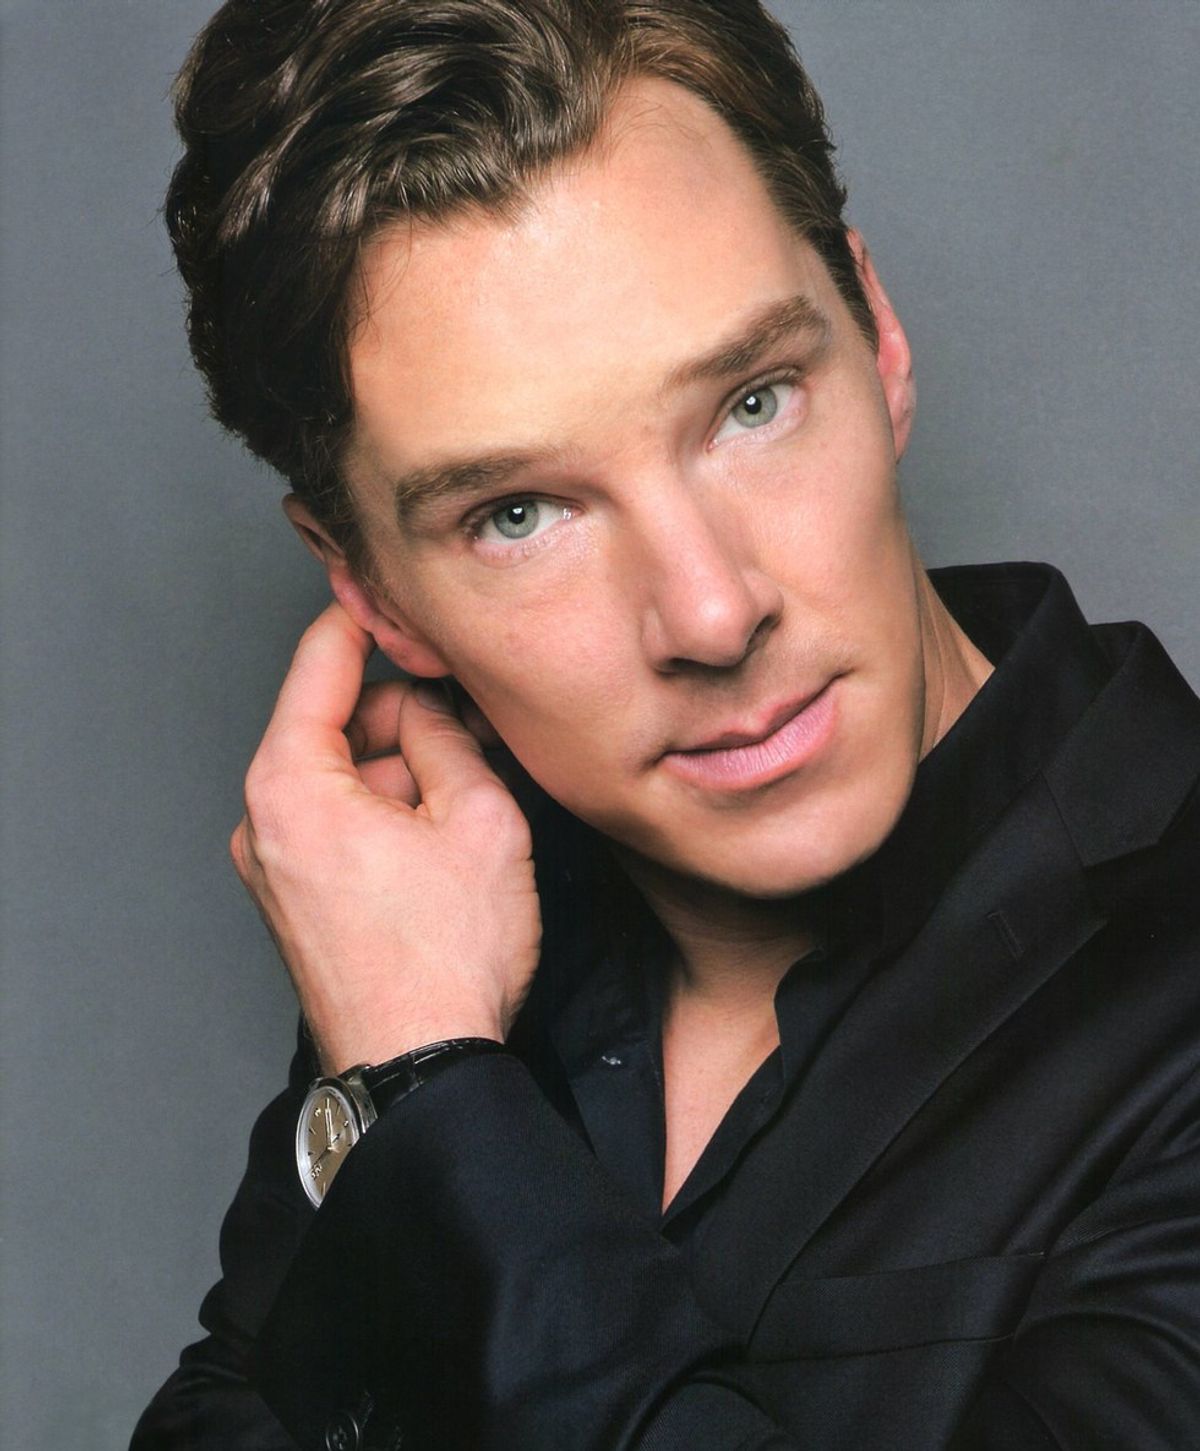 The Importance Of Benedict Cumberbatch To American Society